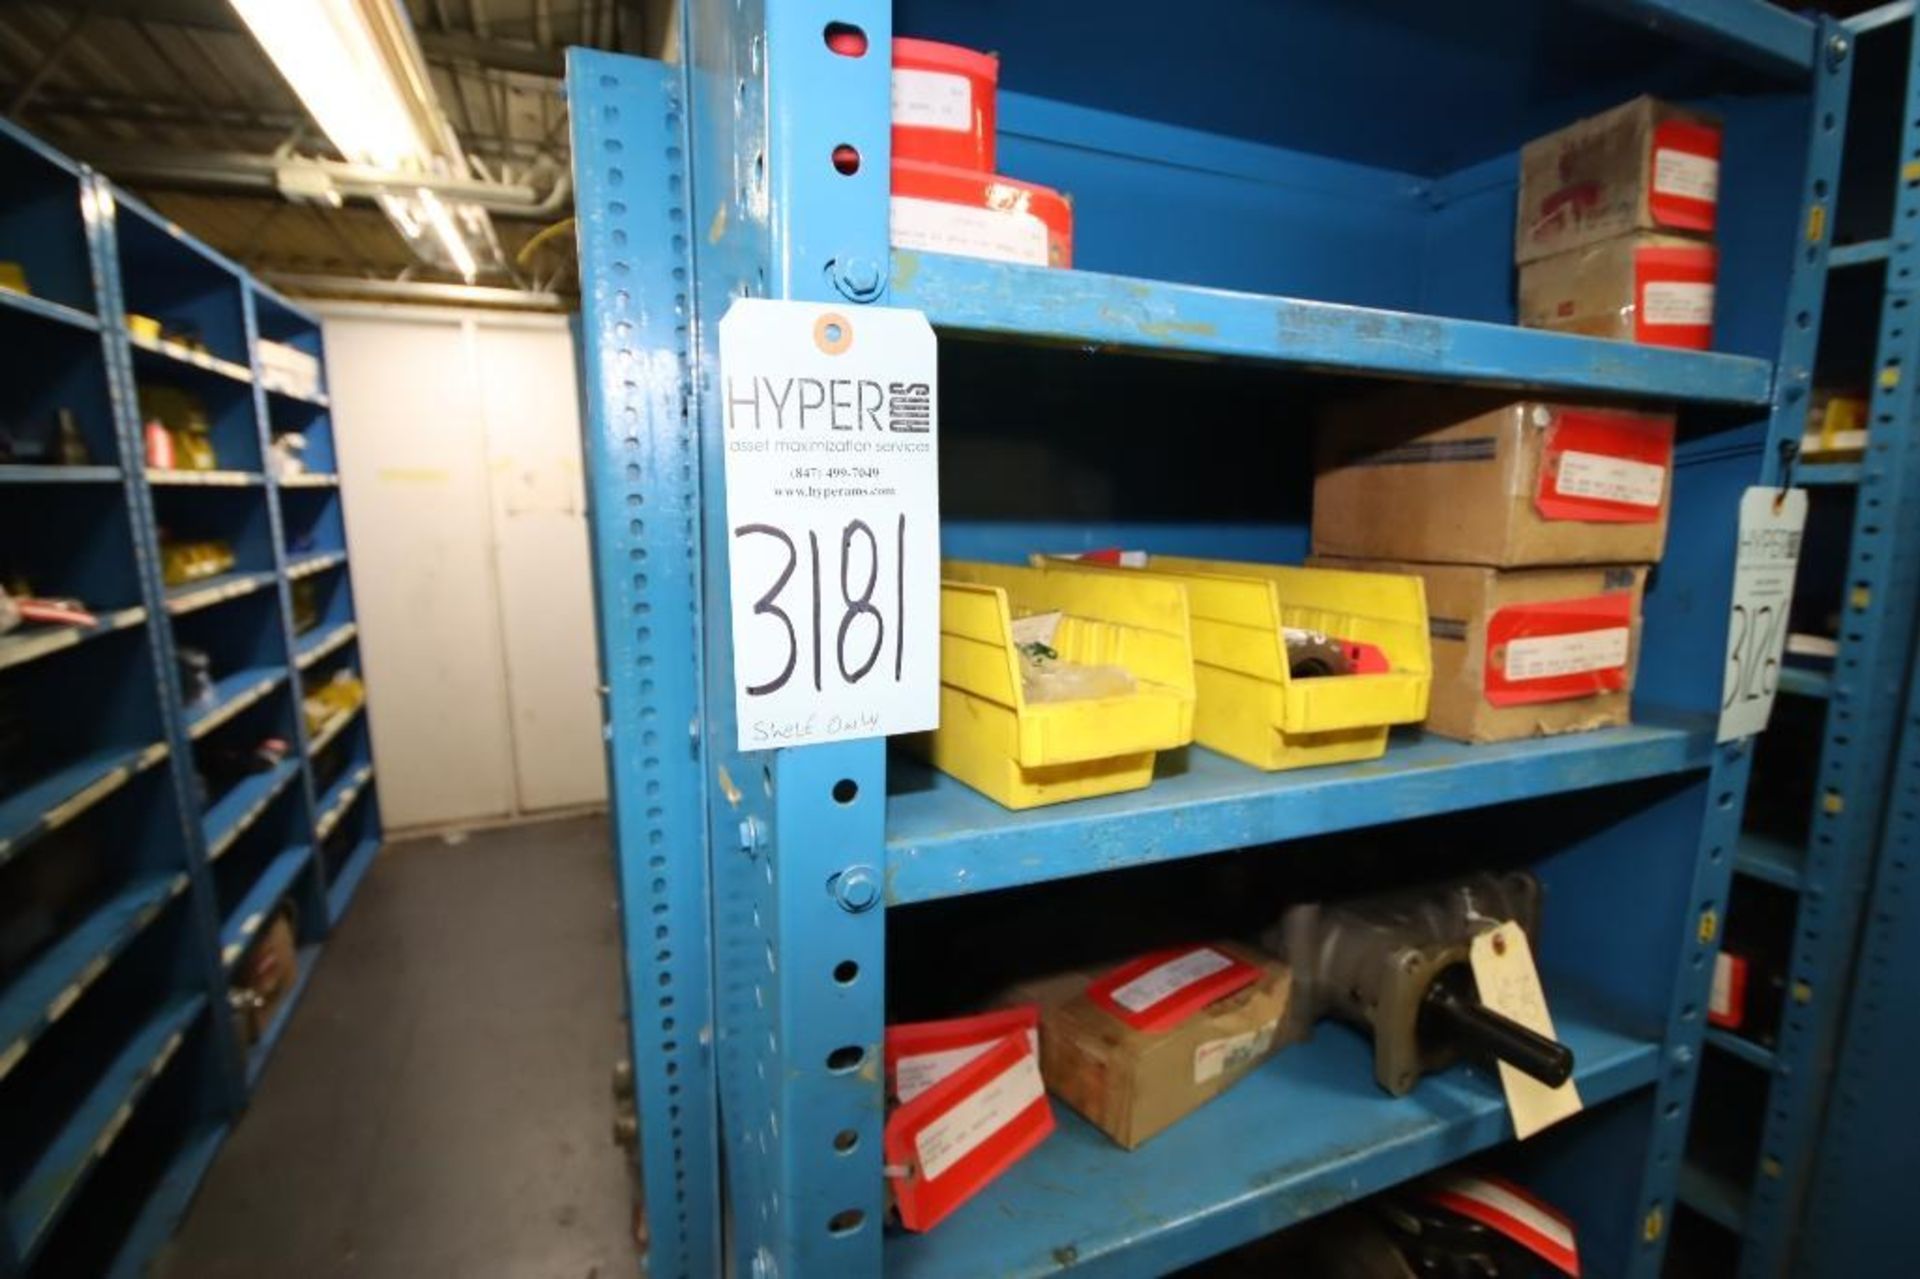 (9) Sections of Adjustable Shelve Units (167-175), SHELVES/RACKS ONLY-NO CONTENTS, LOCATED ON SECOND